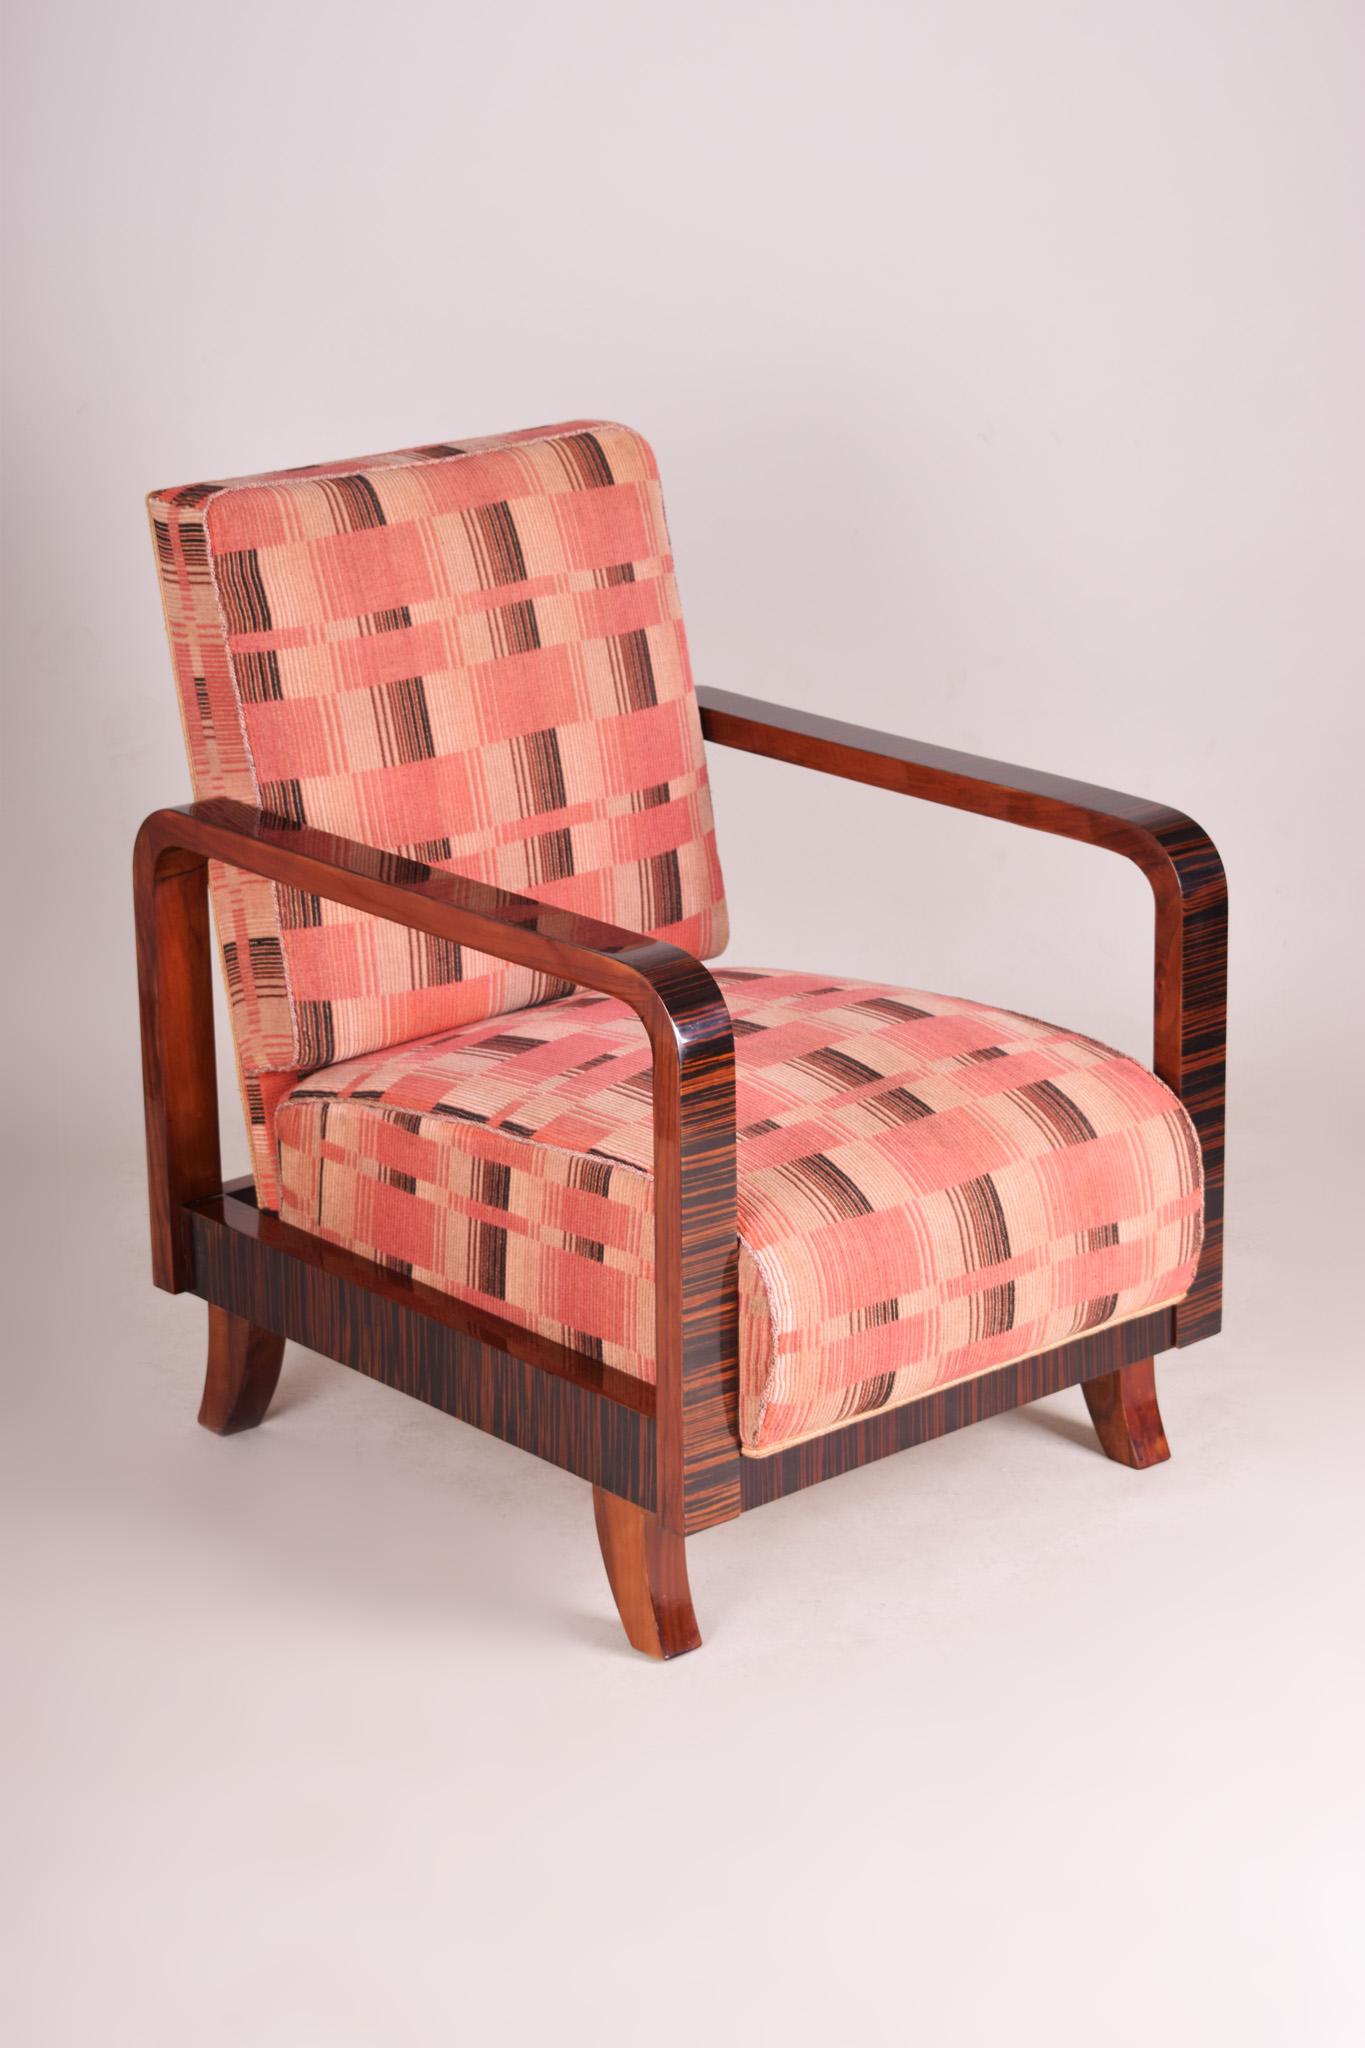 Pink Art Deco Armchair, Made in 1930s Czechia and Restored, Original Fabric For Sale 7